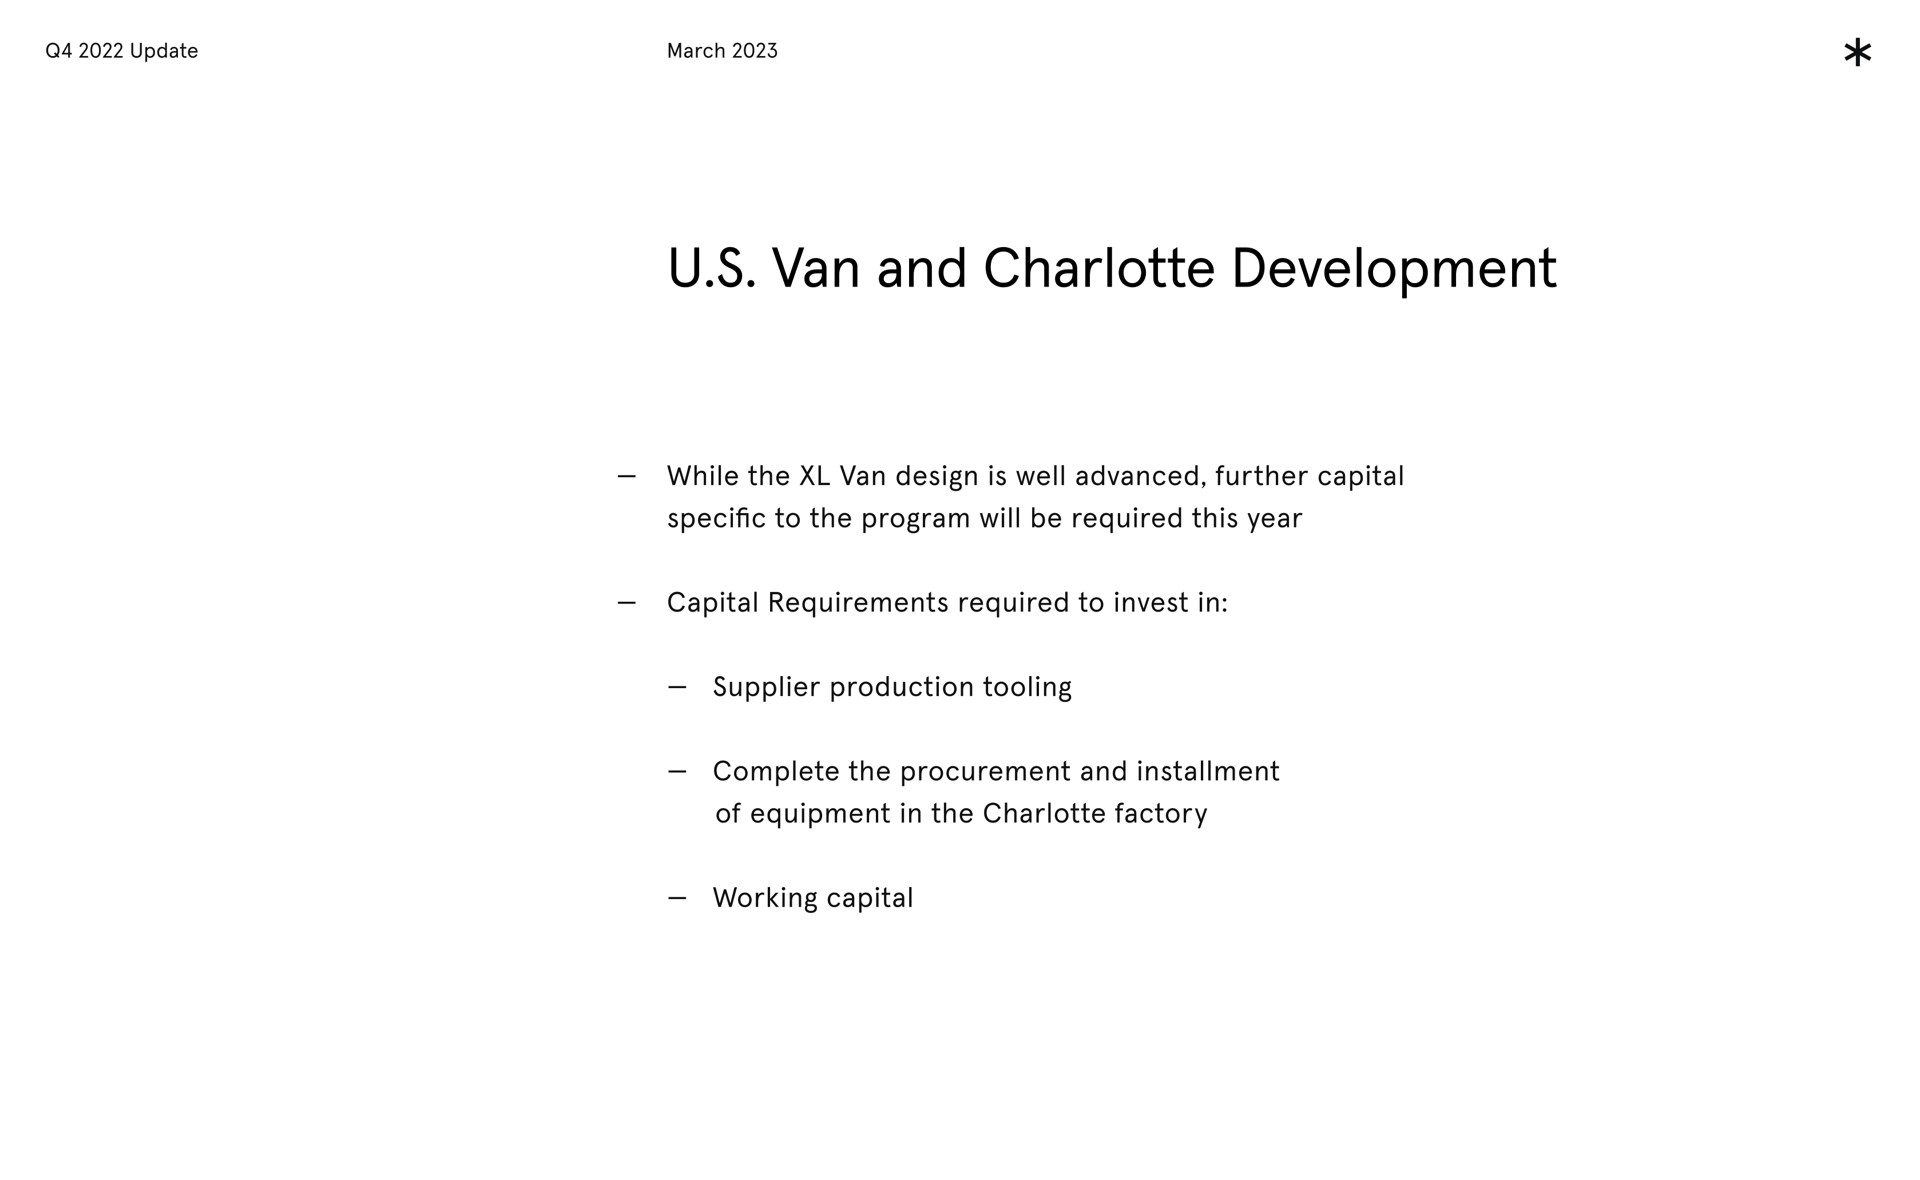 van and development while the van is ell advanced further capital to the ill required this capital requirements required to invest in supplier production tooling complete the procurement and installment of equipment in the factory capital design well specific program will be year working | Arrival